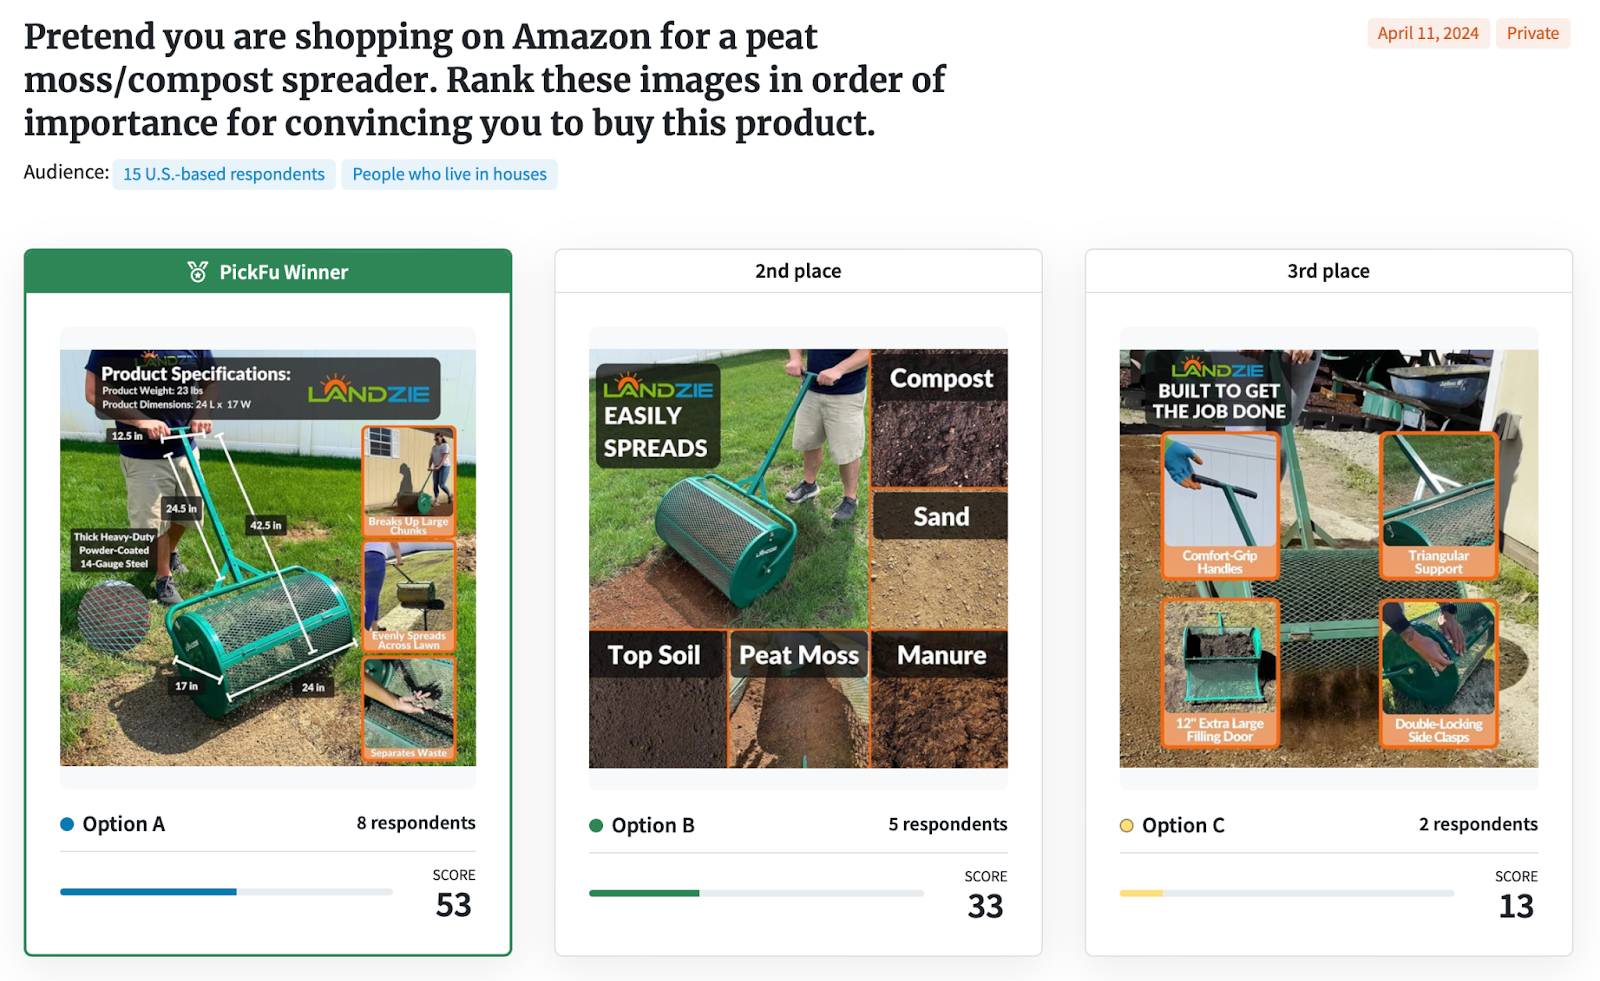 Screenshot of a PickFu survey asking about the importance of product images when shopping for a peat moss/compost spreader